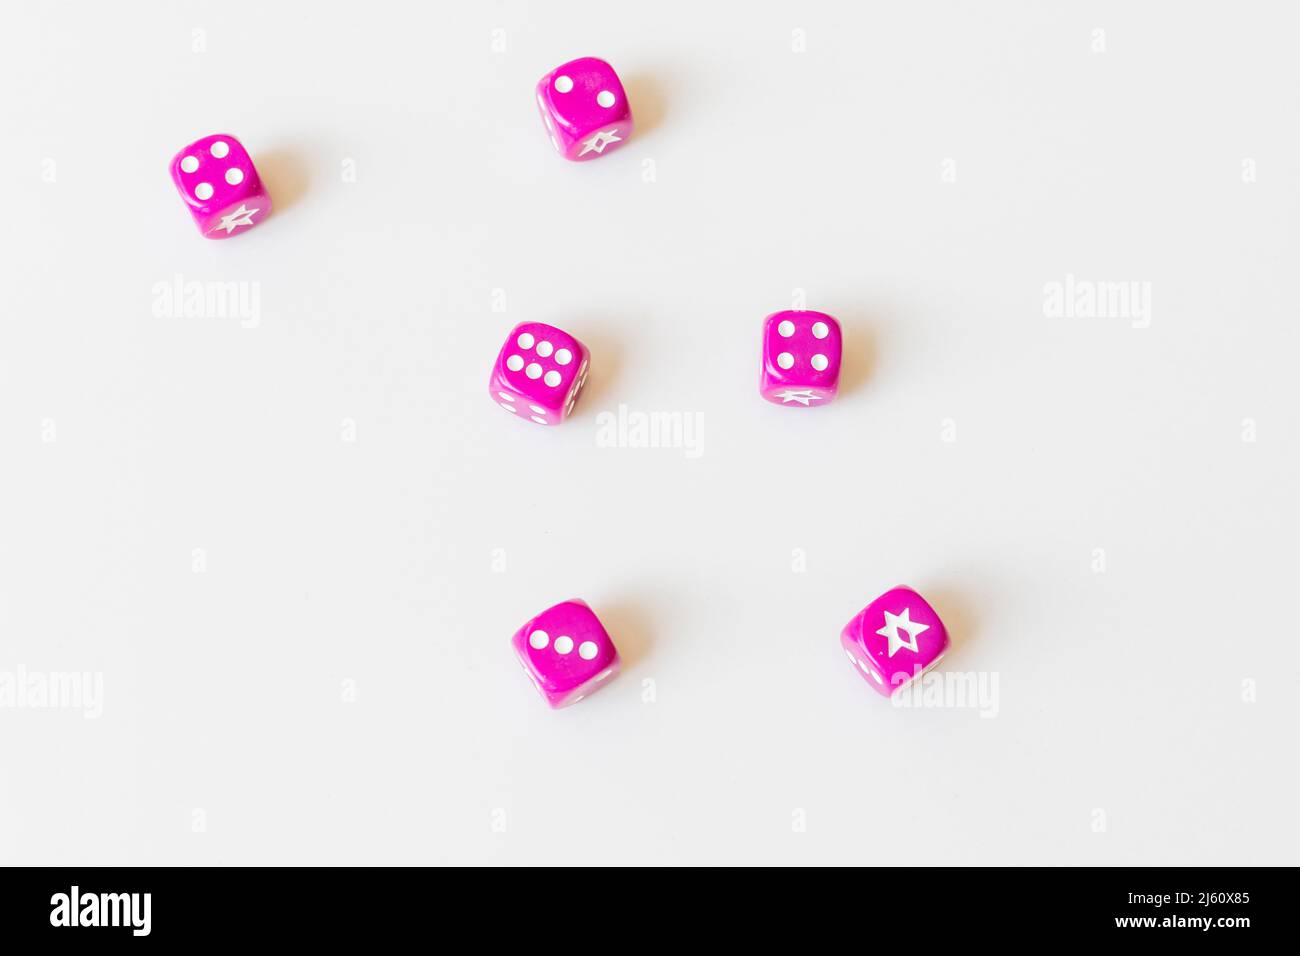 Dices with a random outcome result Stock Photo